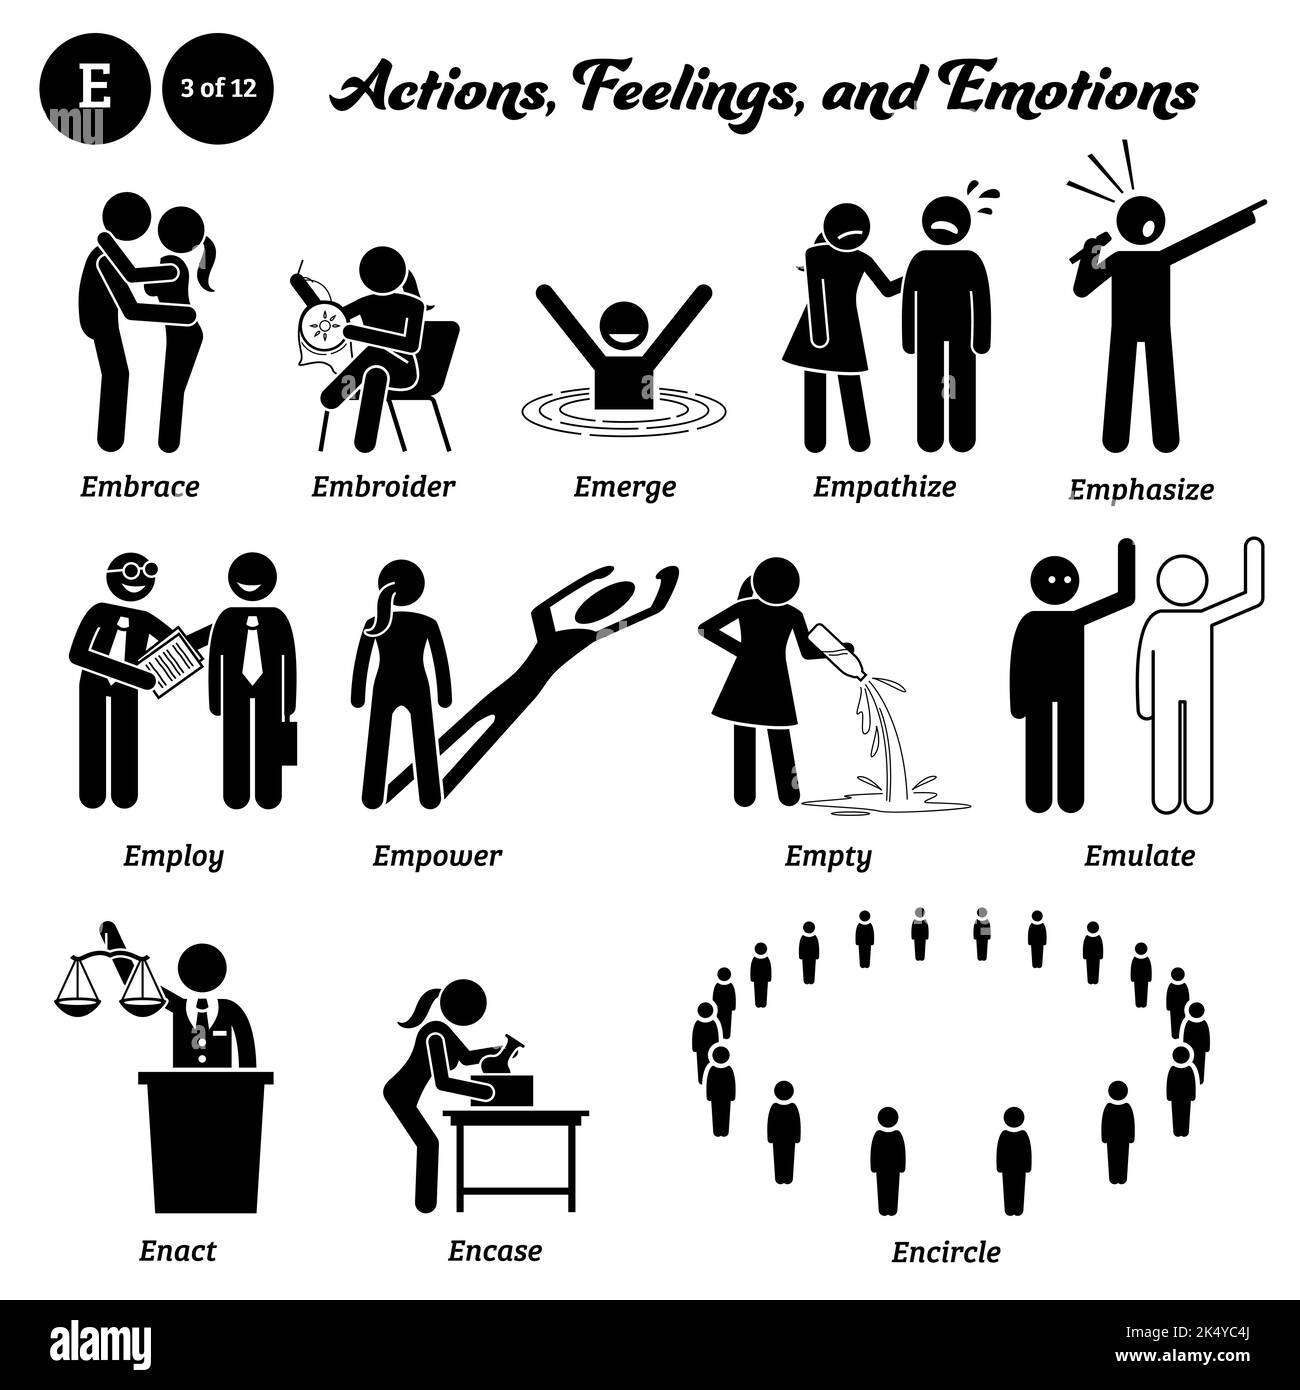 Stick figure human people man action, feelings, and emotions icons alphabet E. Embrace, embroider, emerge, empathize, emphasize, employ, empower, empt Stock Vector